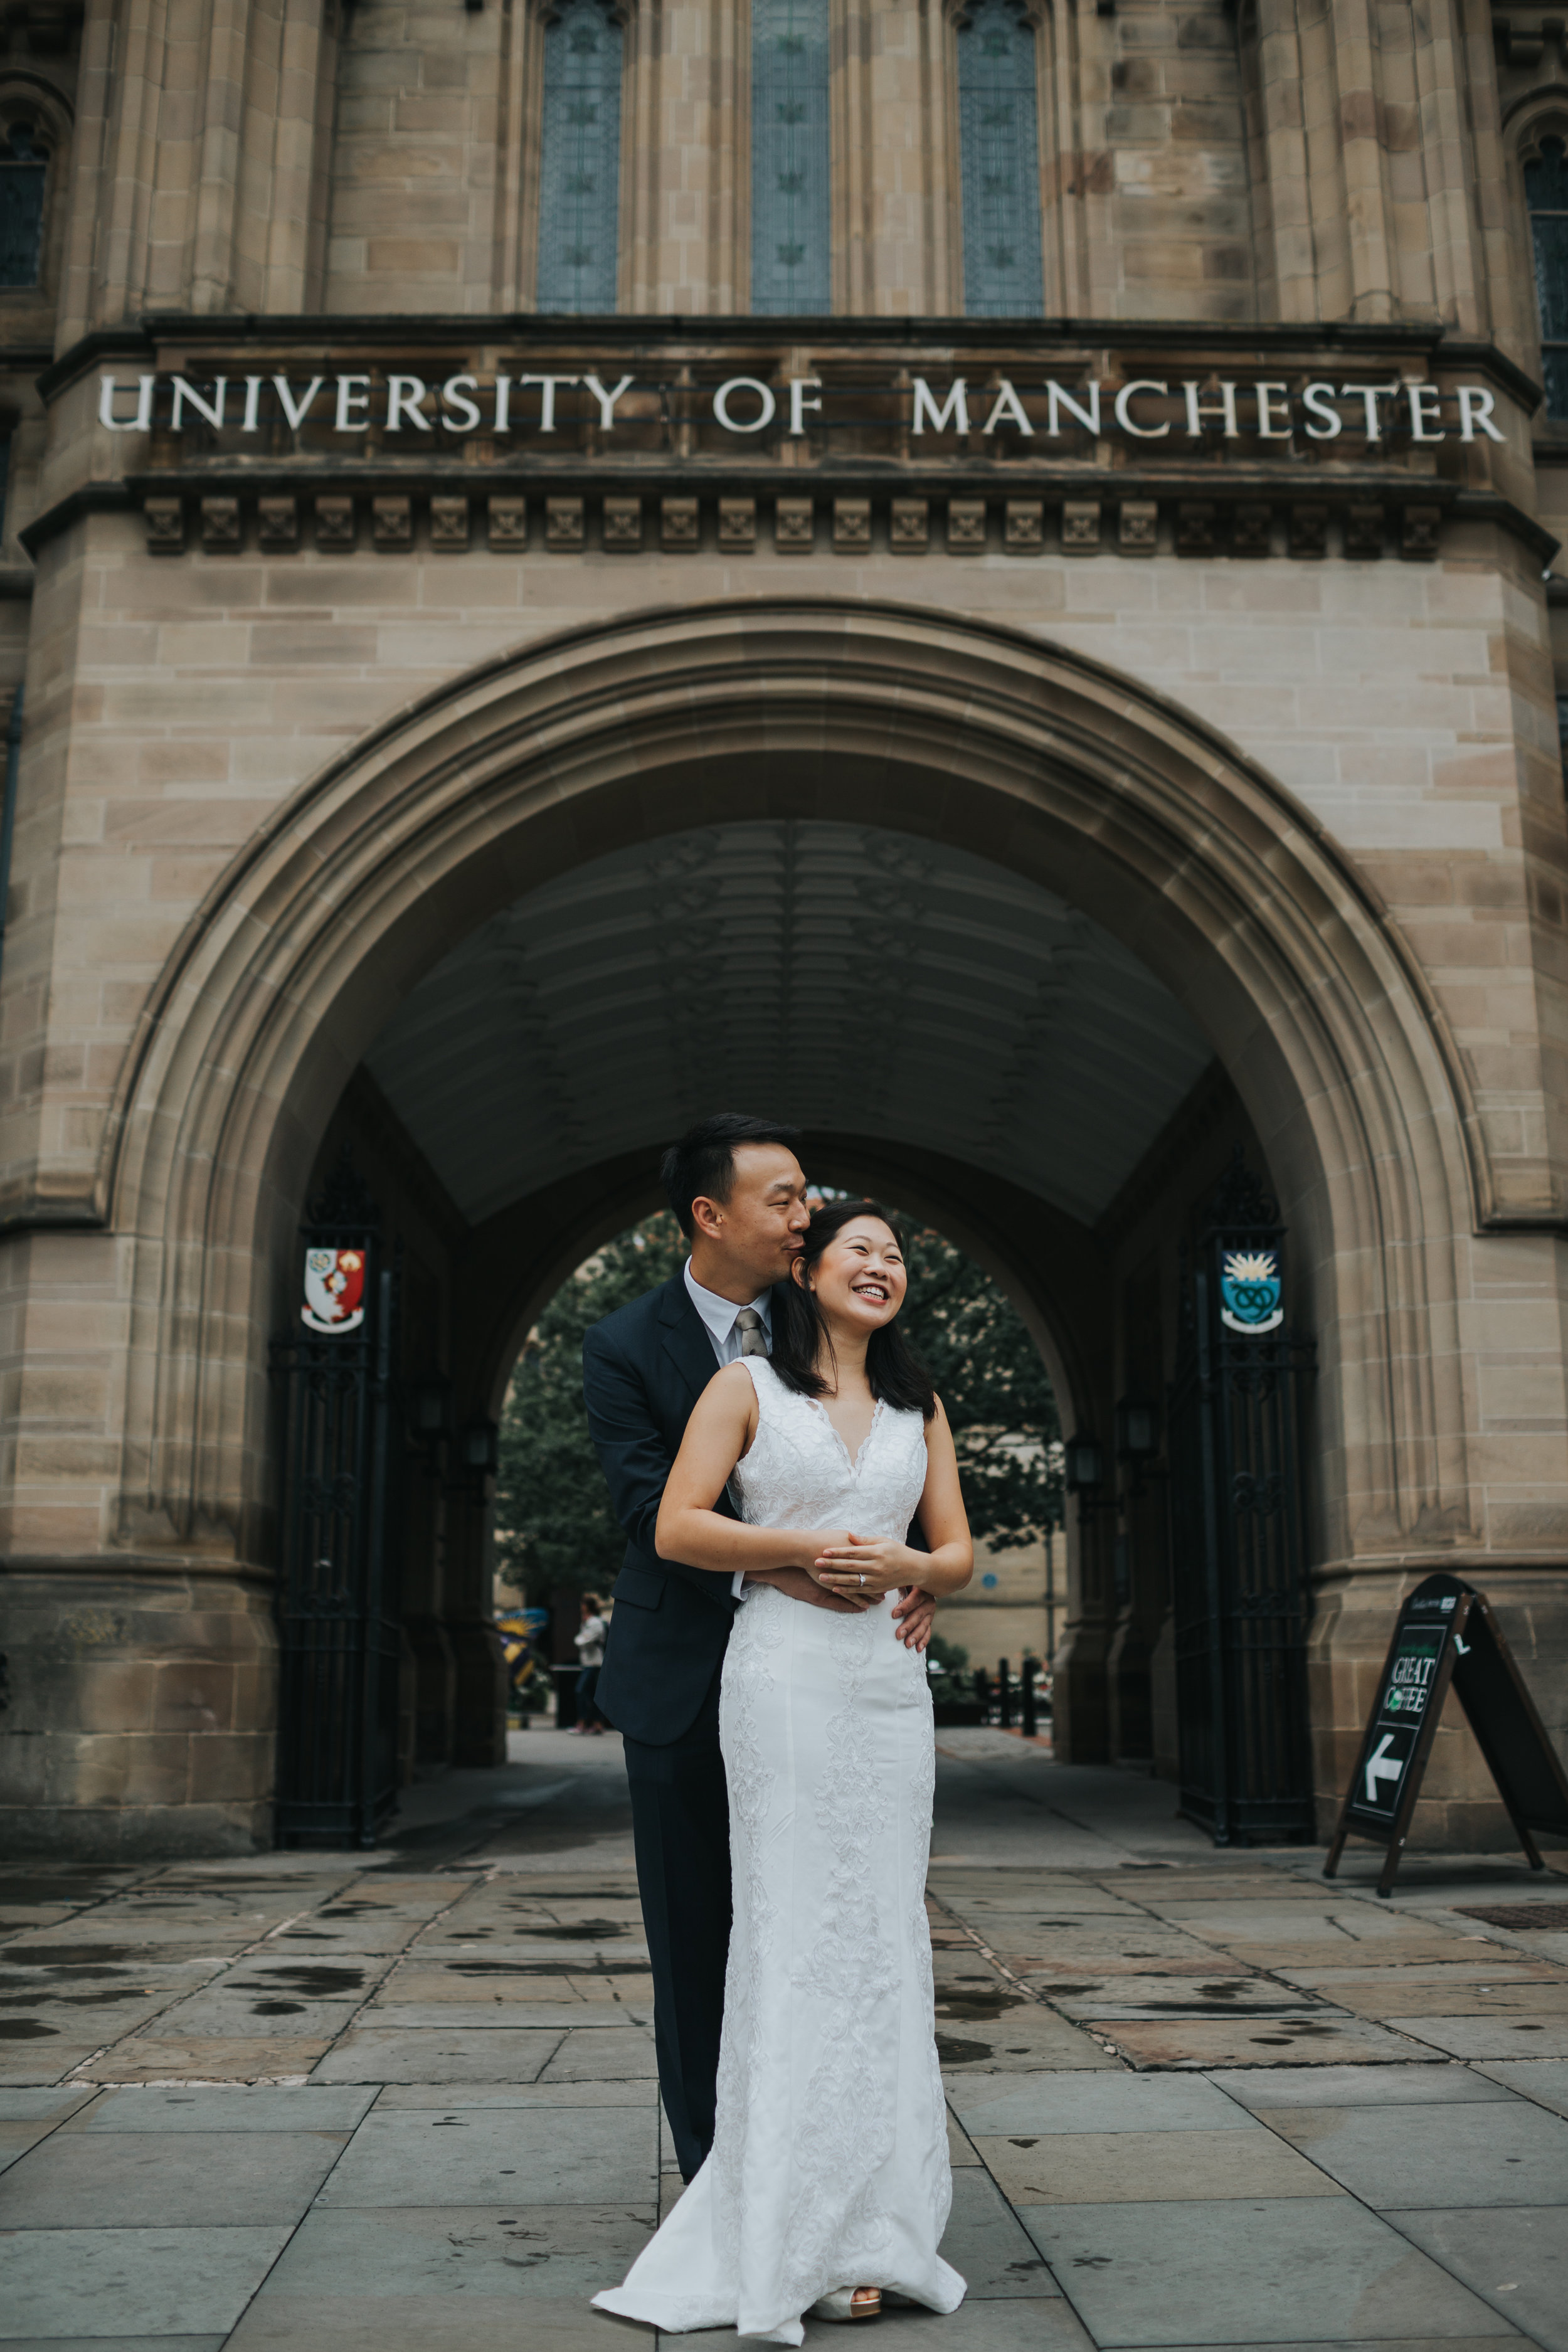 Couple have a cuddle in the Manchester university archway. 